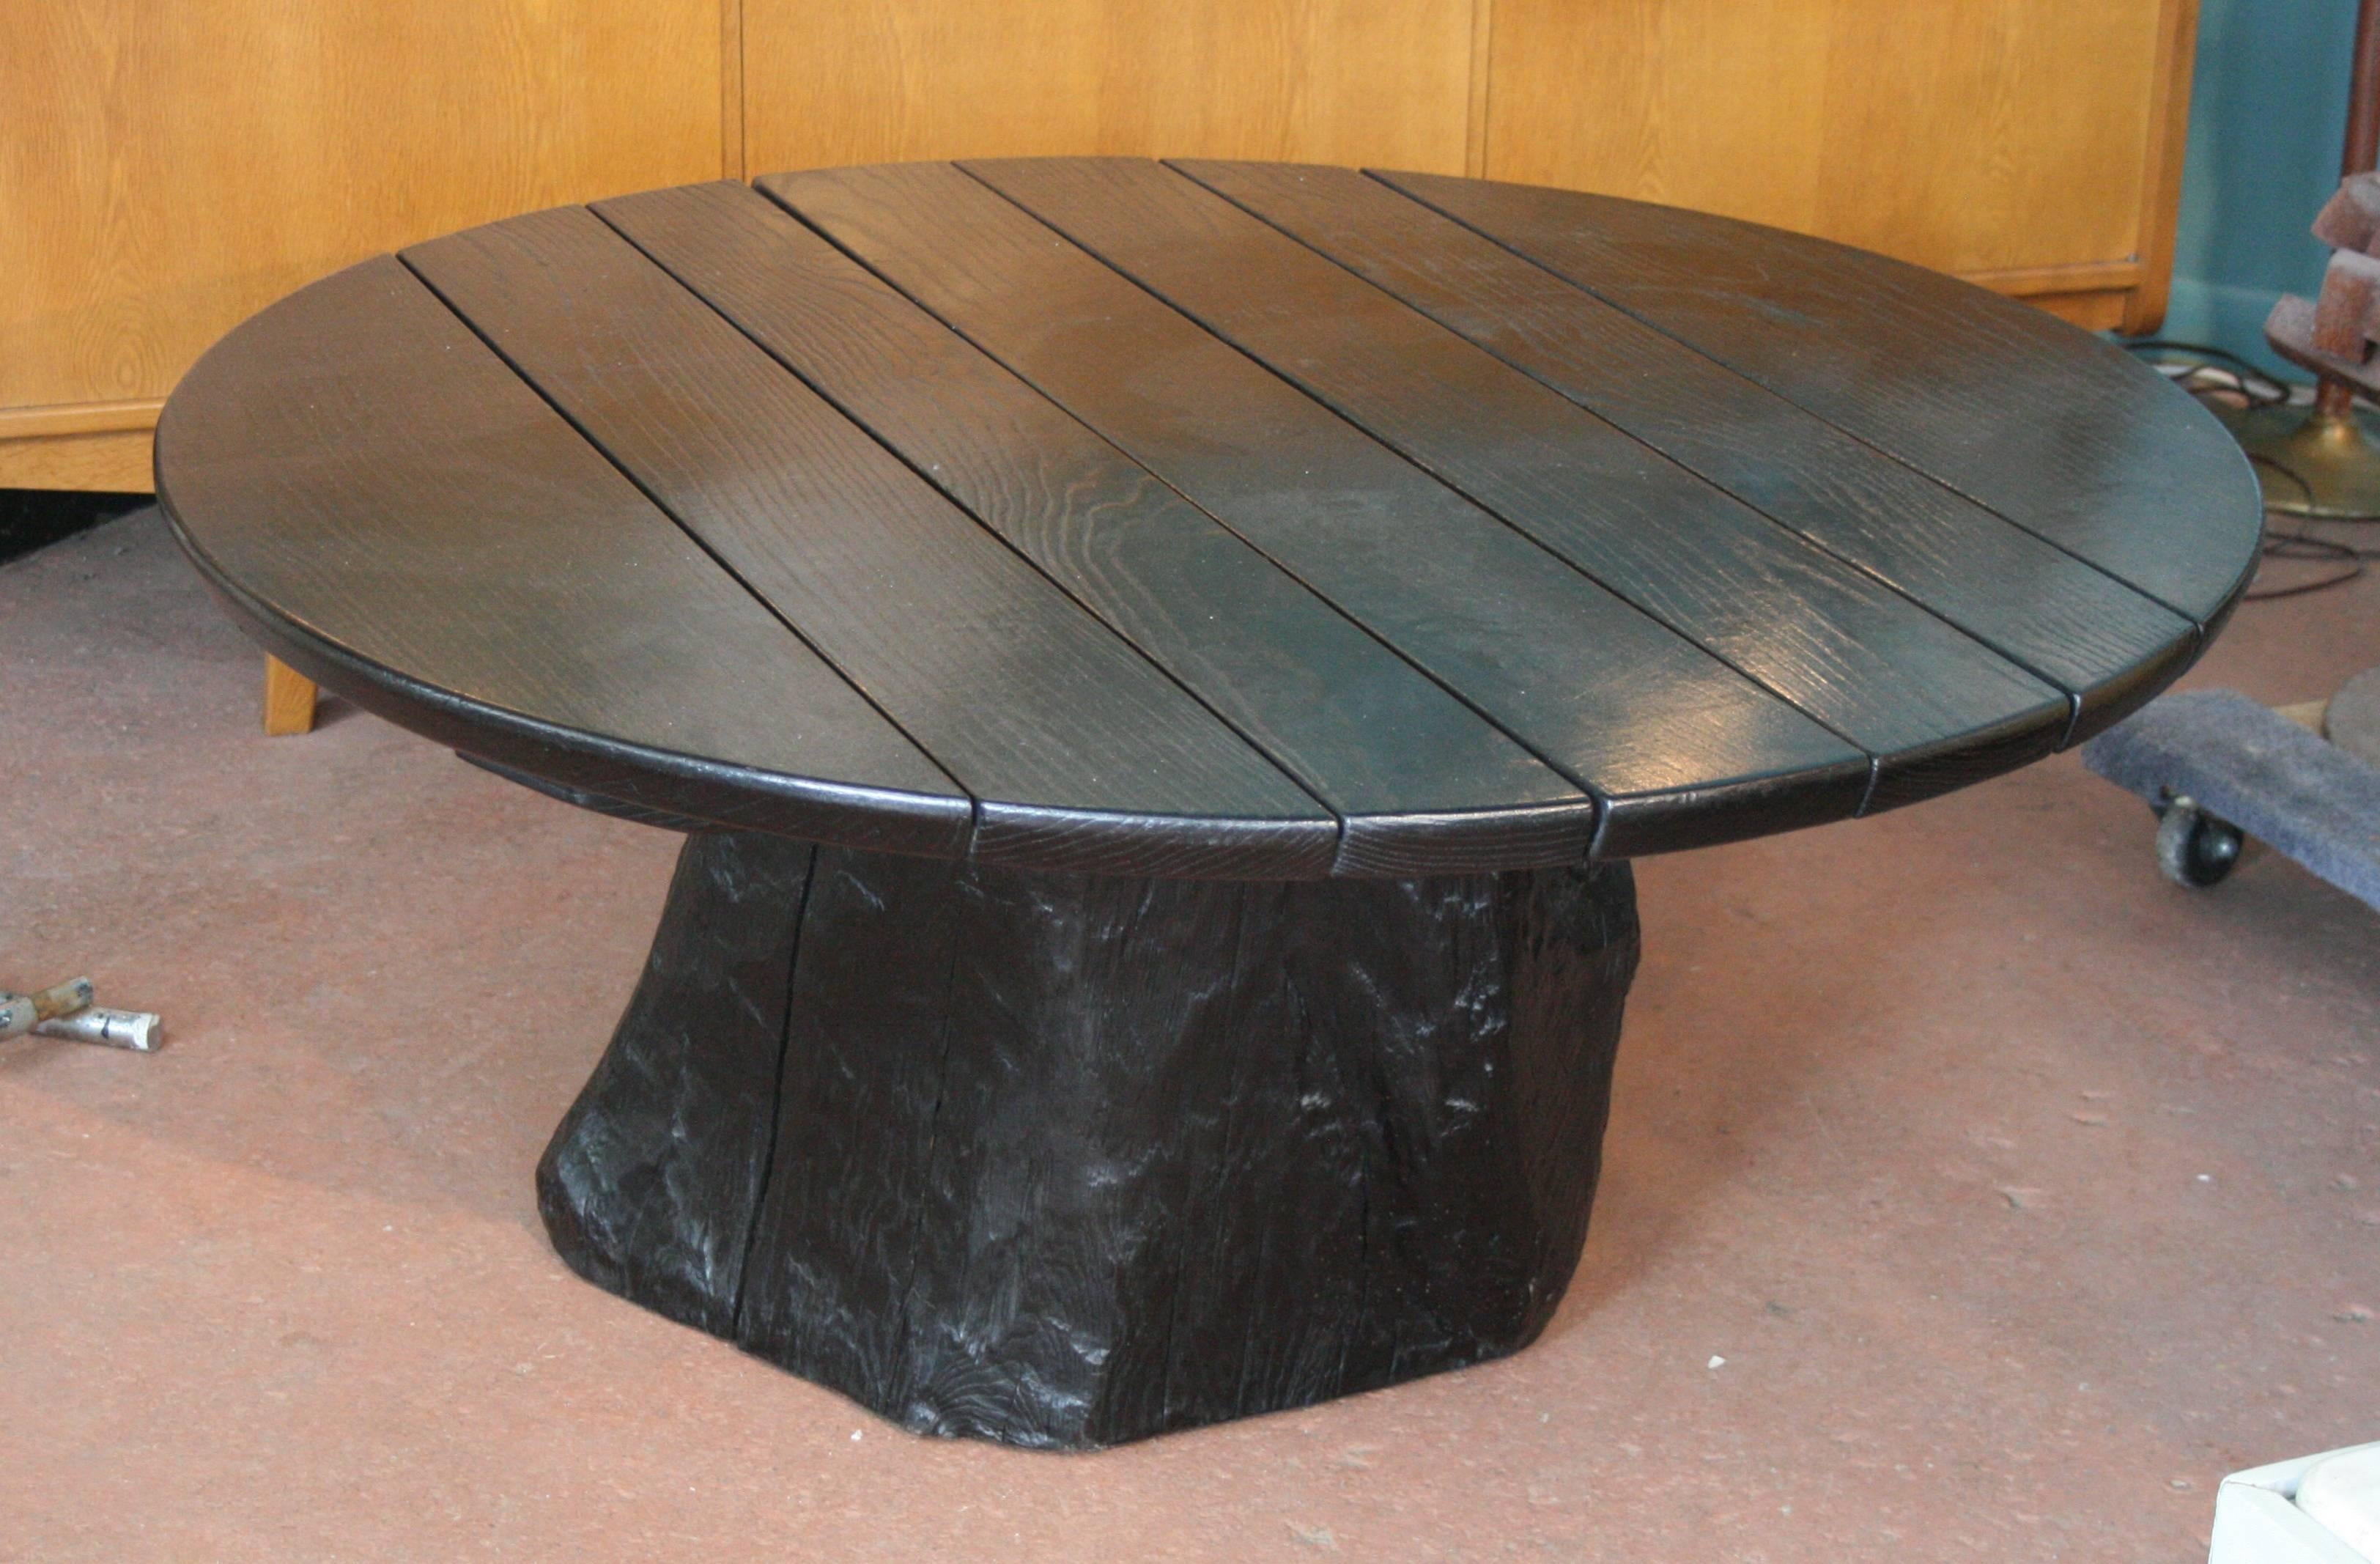 Large round low table with a solid oak plank top and an impressive natural solid tree trunk base.
Avantgarden Ltd. cultivates unexpected and exceptional lighting, furniture and design.  To view items in person please visit our showroom in Pound